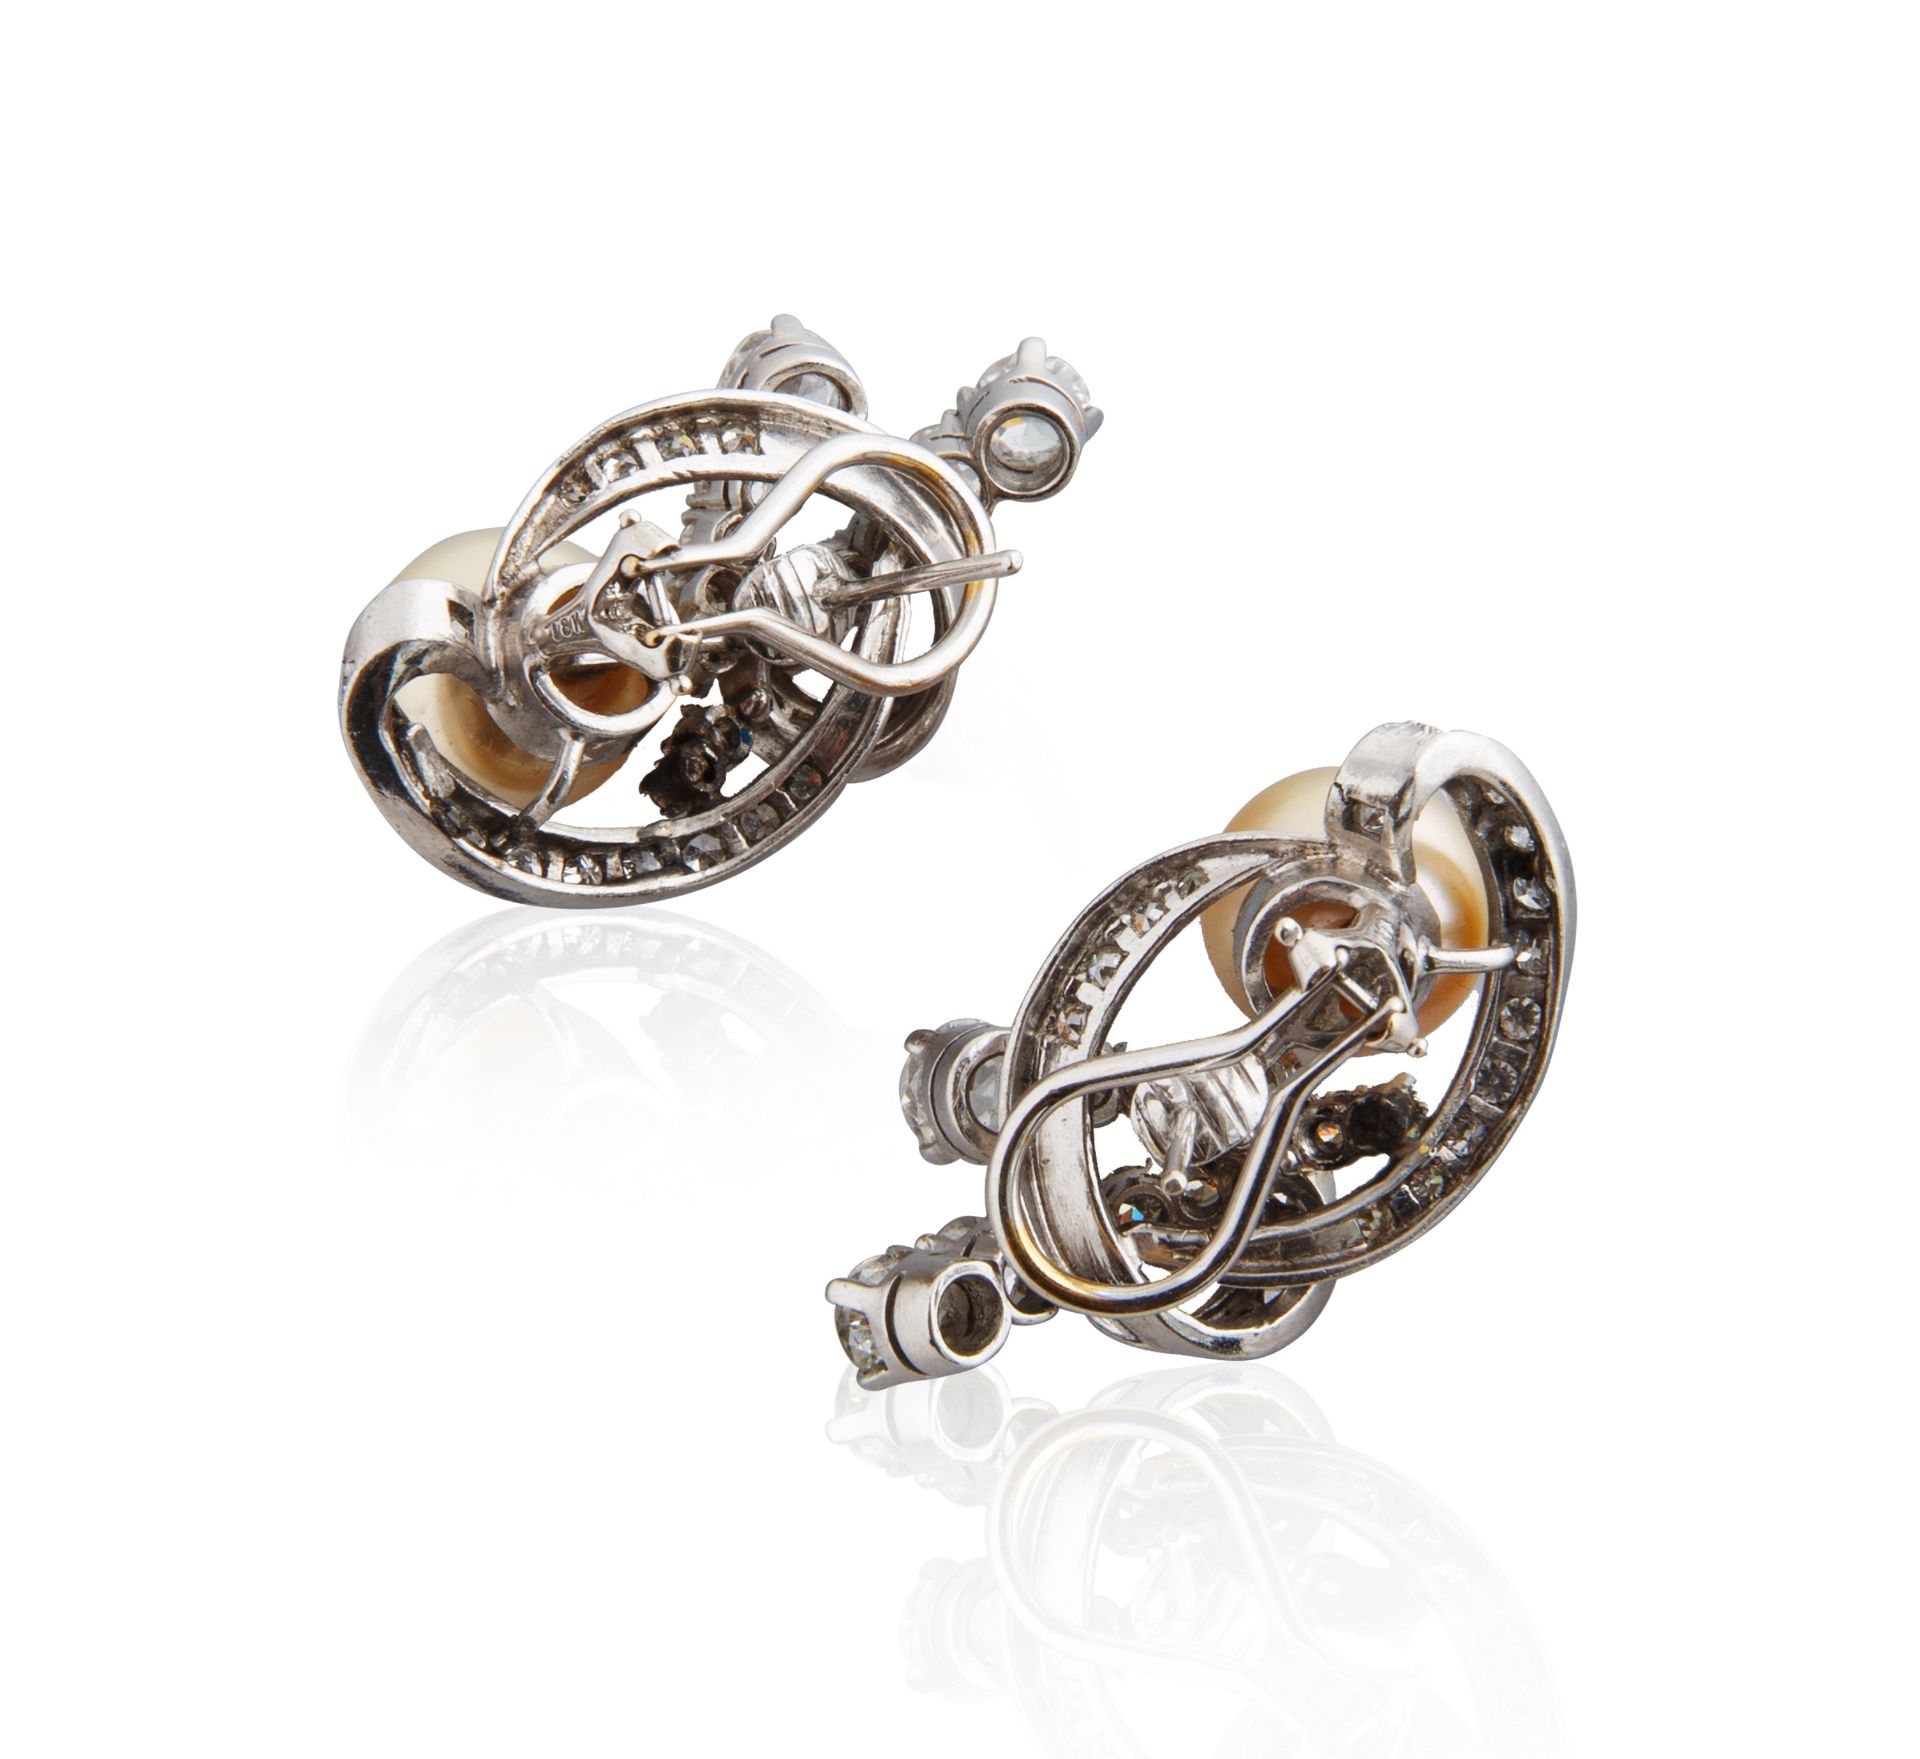 PAIR OF CULTURED YELLOW PEARL, DIAMOND AND WHITE GOLD EARRINGS - Image 2 of 5